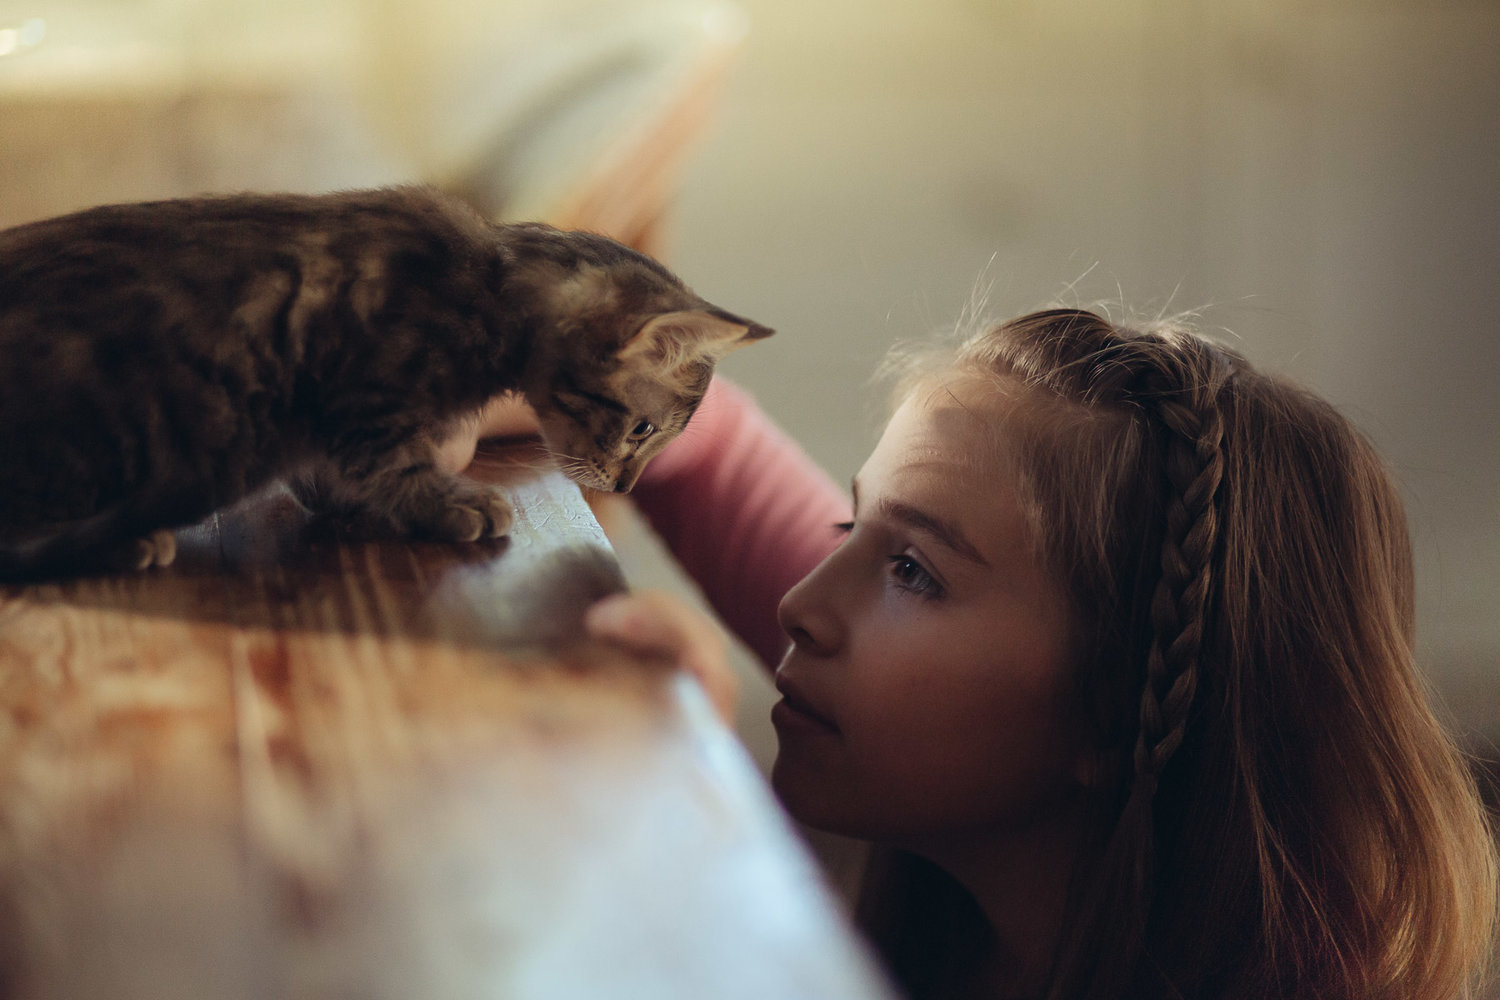 little-girl-with-kitty-kitchen-playing-animal-photographer.jpg